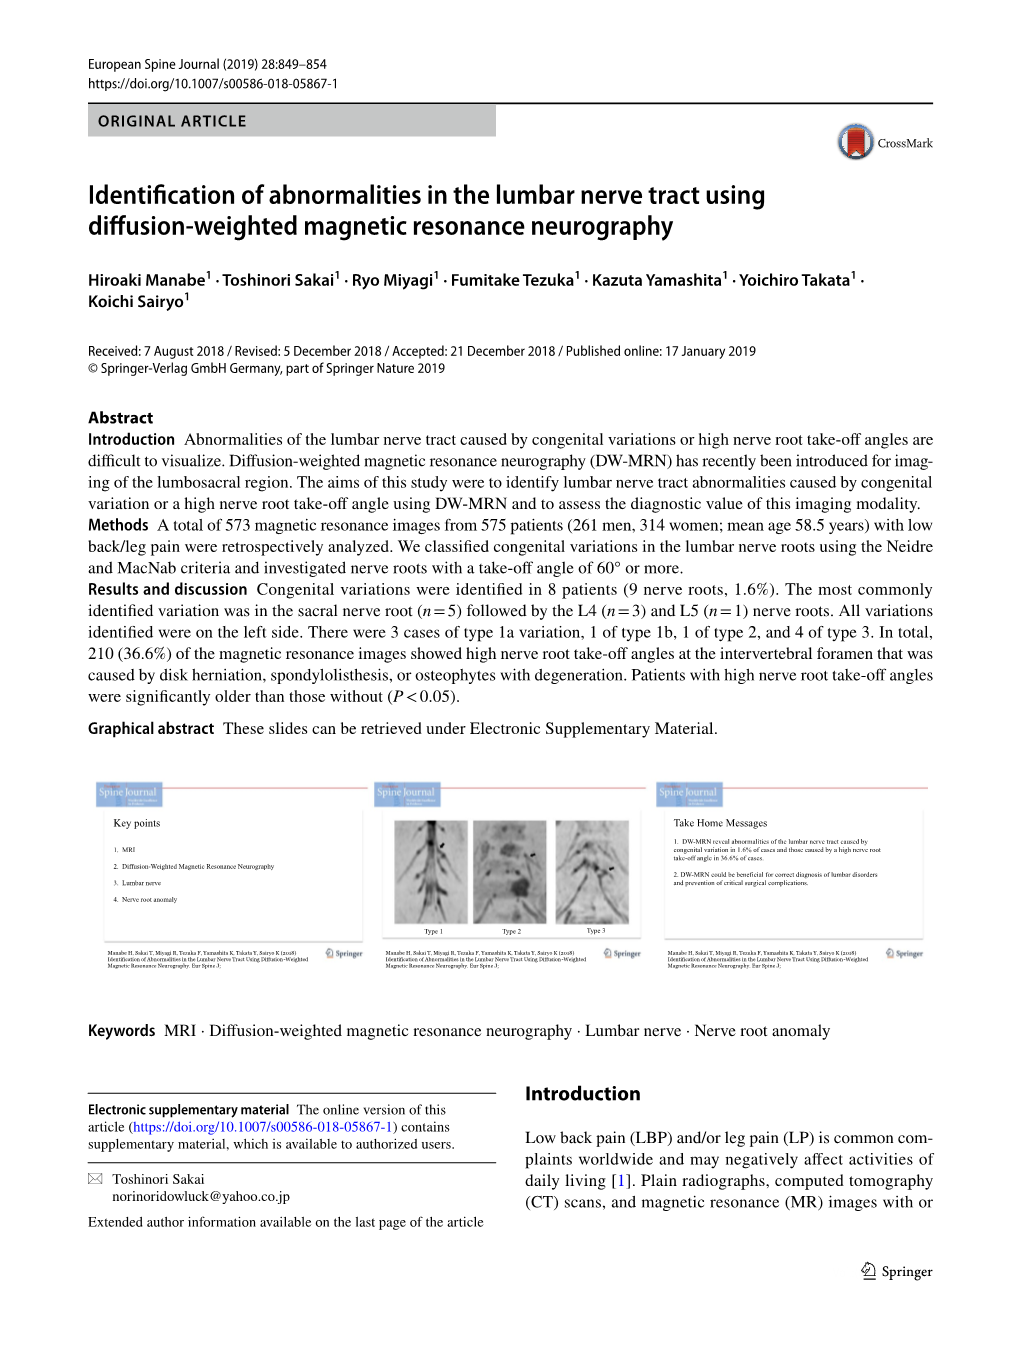 Identification of Abnormalities in the Lumbar Nerve Tract Using Diffusion